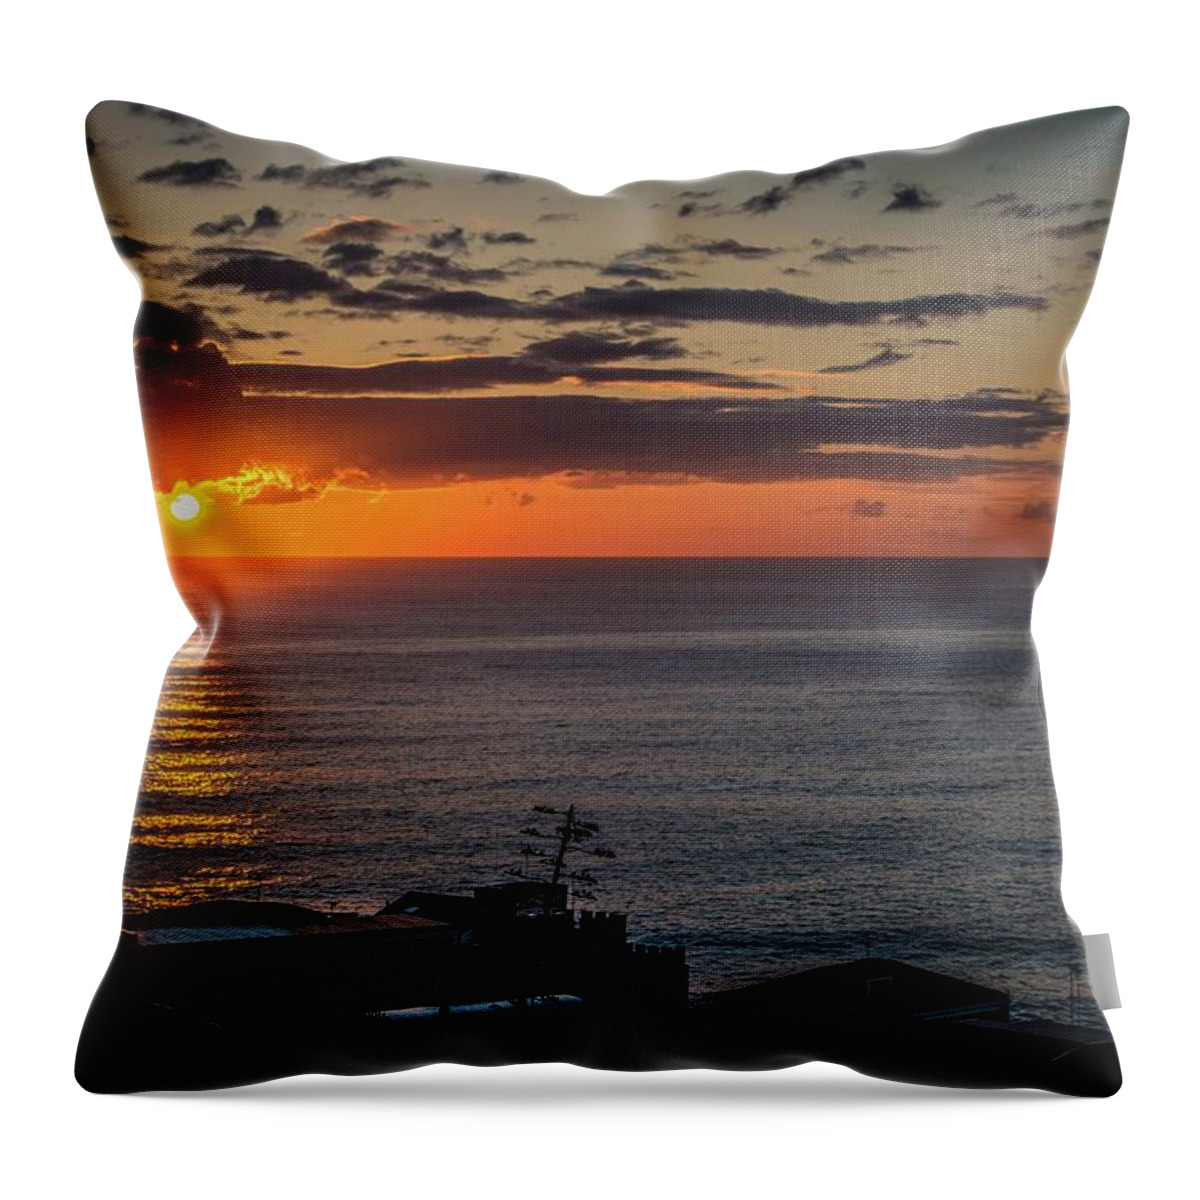 Sunrise Throw Pillow featuring the photograph Morning Rays by Larkin's Balcony Photography